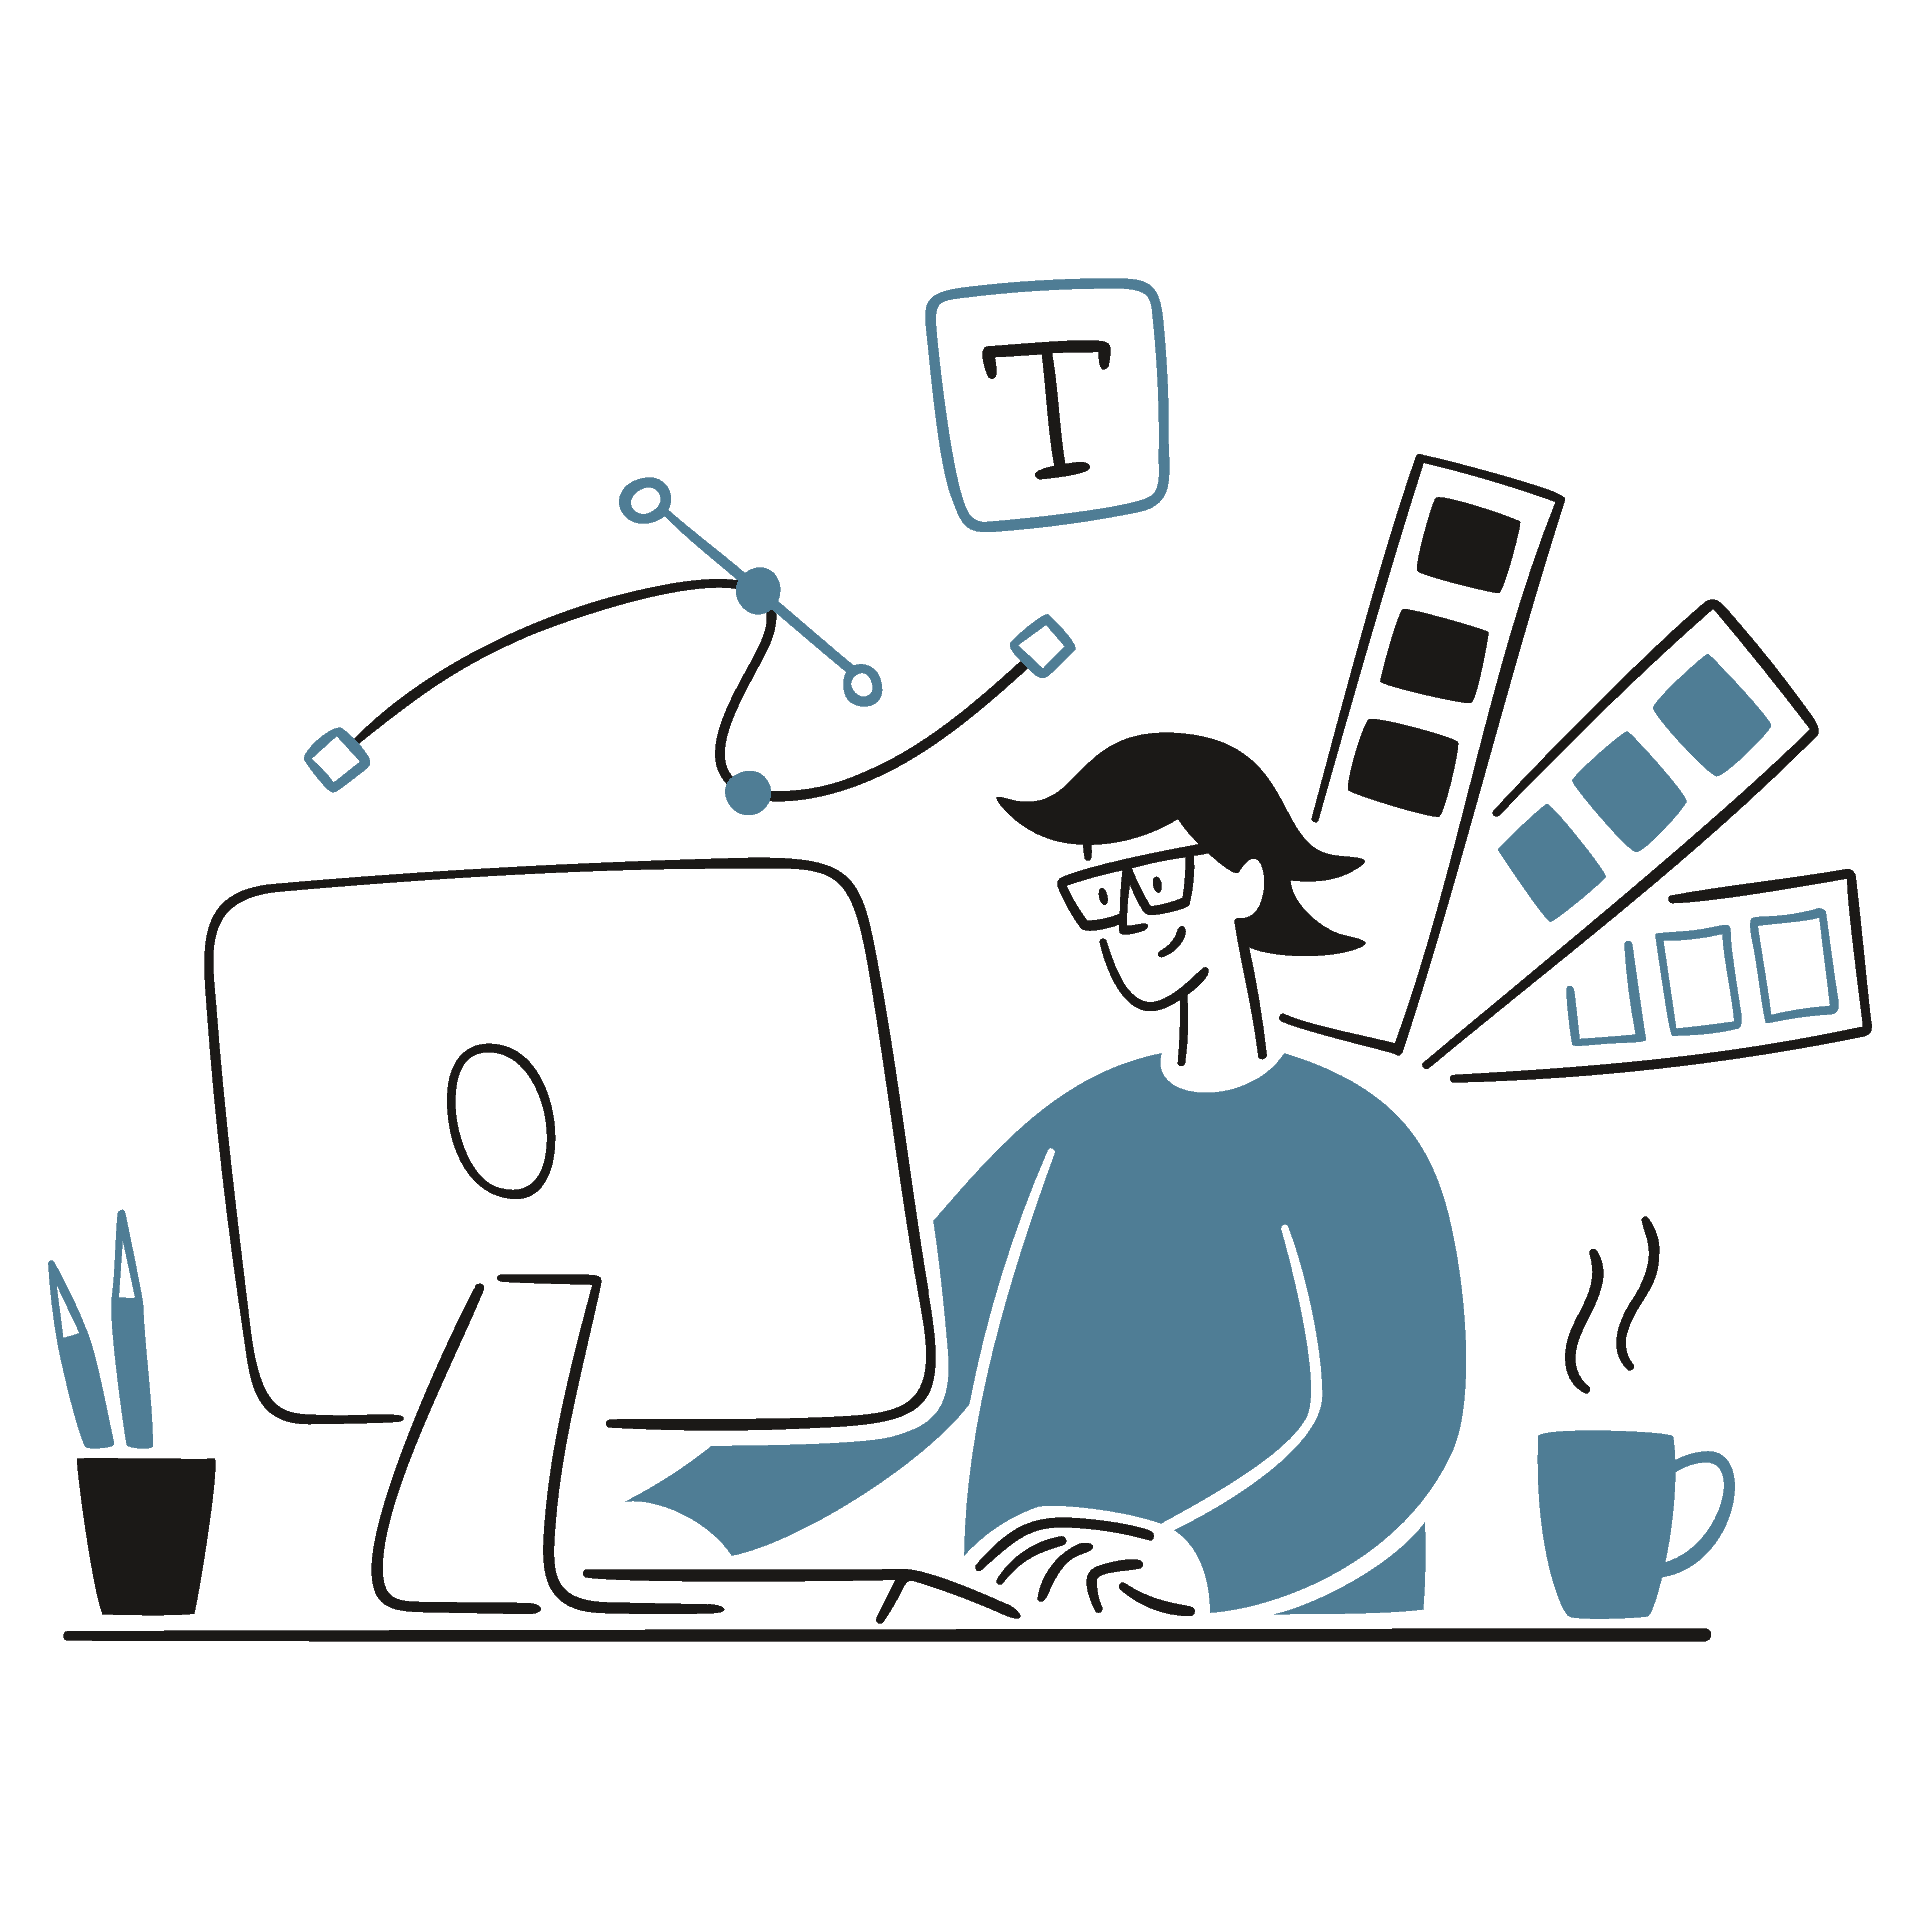 An illustration of a person working on a computer.